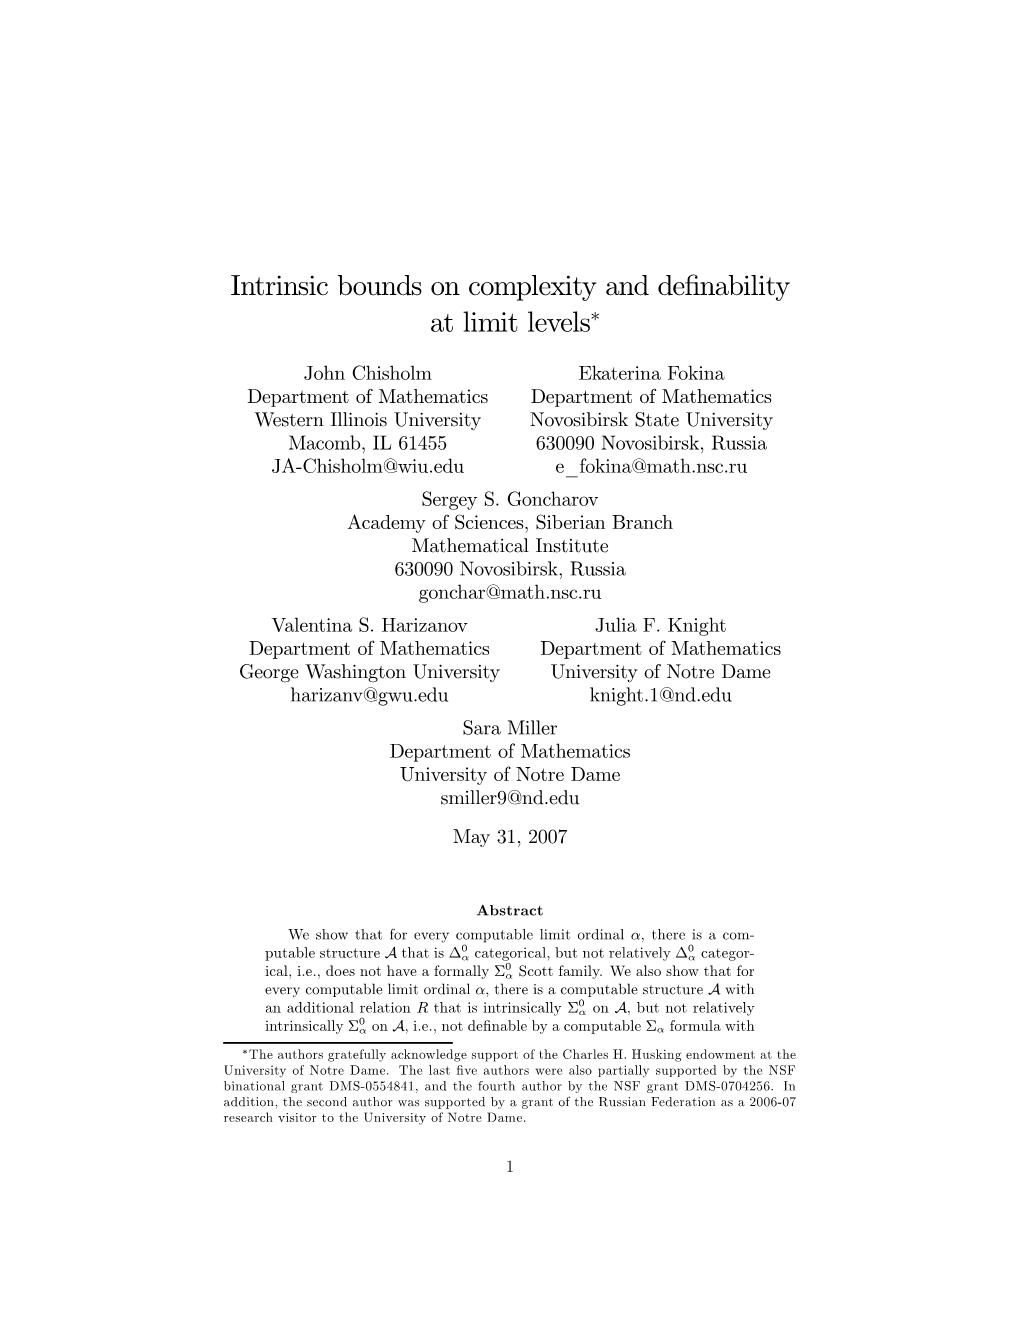 Intrinsic Bounds on Complexity and Definability at Limit Levels*